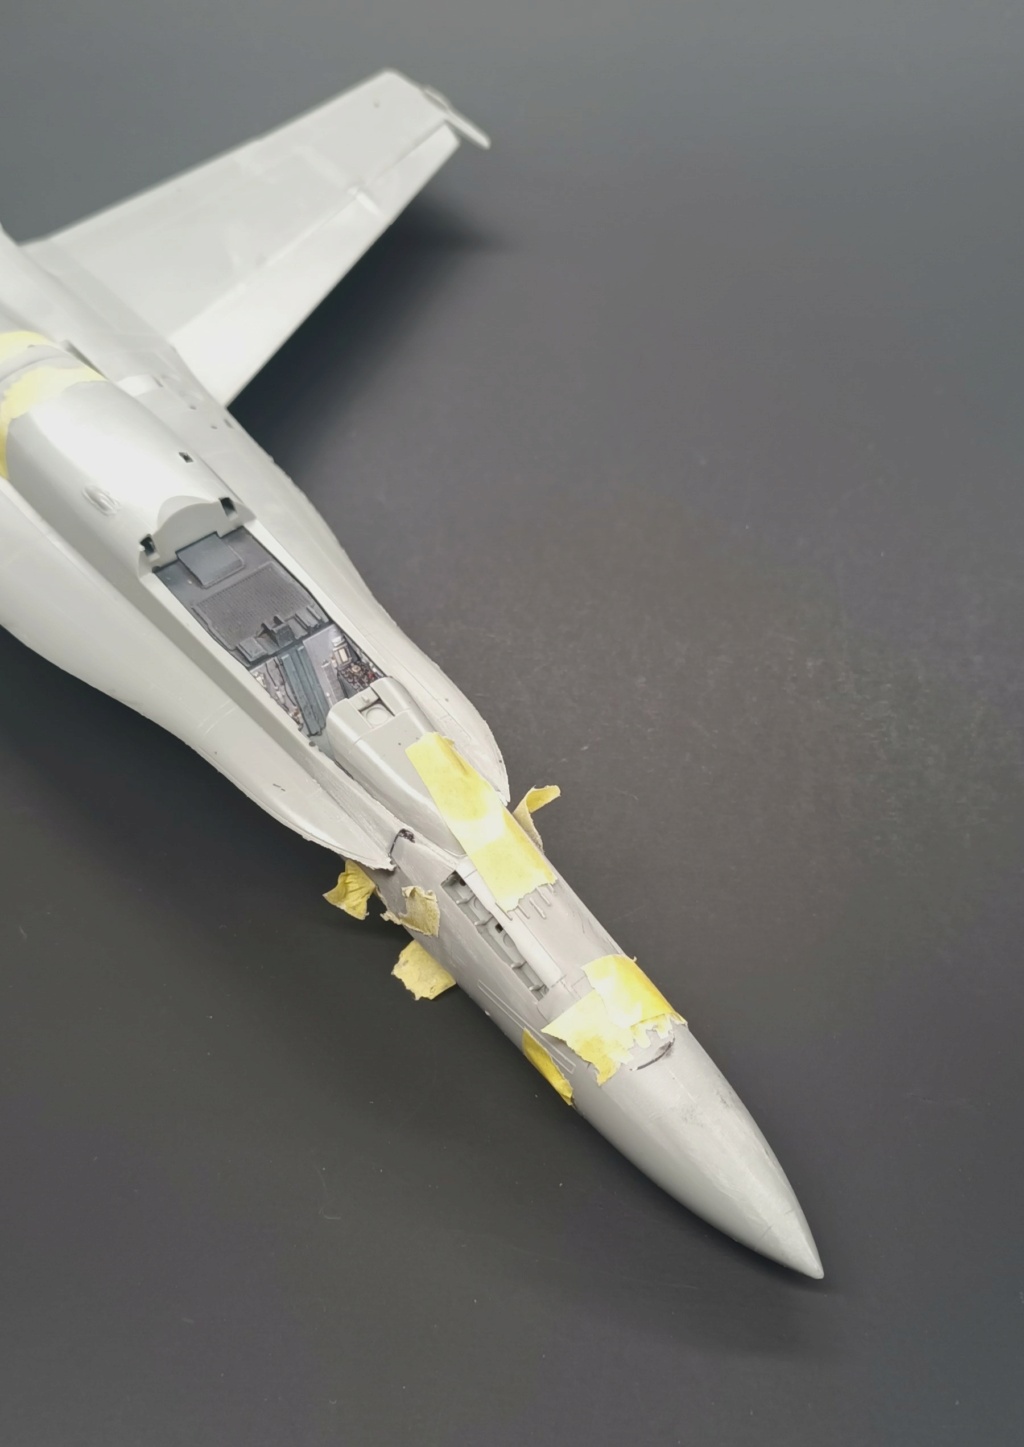 [Kinetic] 1/48  - McDonnell F/A-18A+ Hornet- VFC 12   / Double  [Tamiya] General Dynamics F-16C Fighting Falcon - 64th AGRS  1/48  - Aggressor - Page 4 20240228